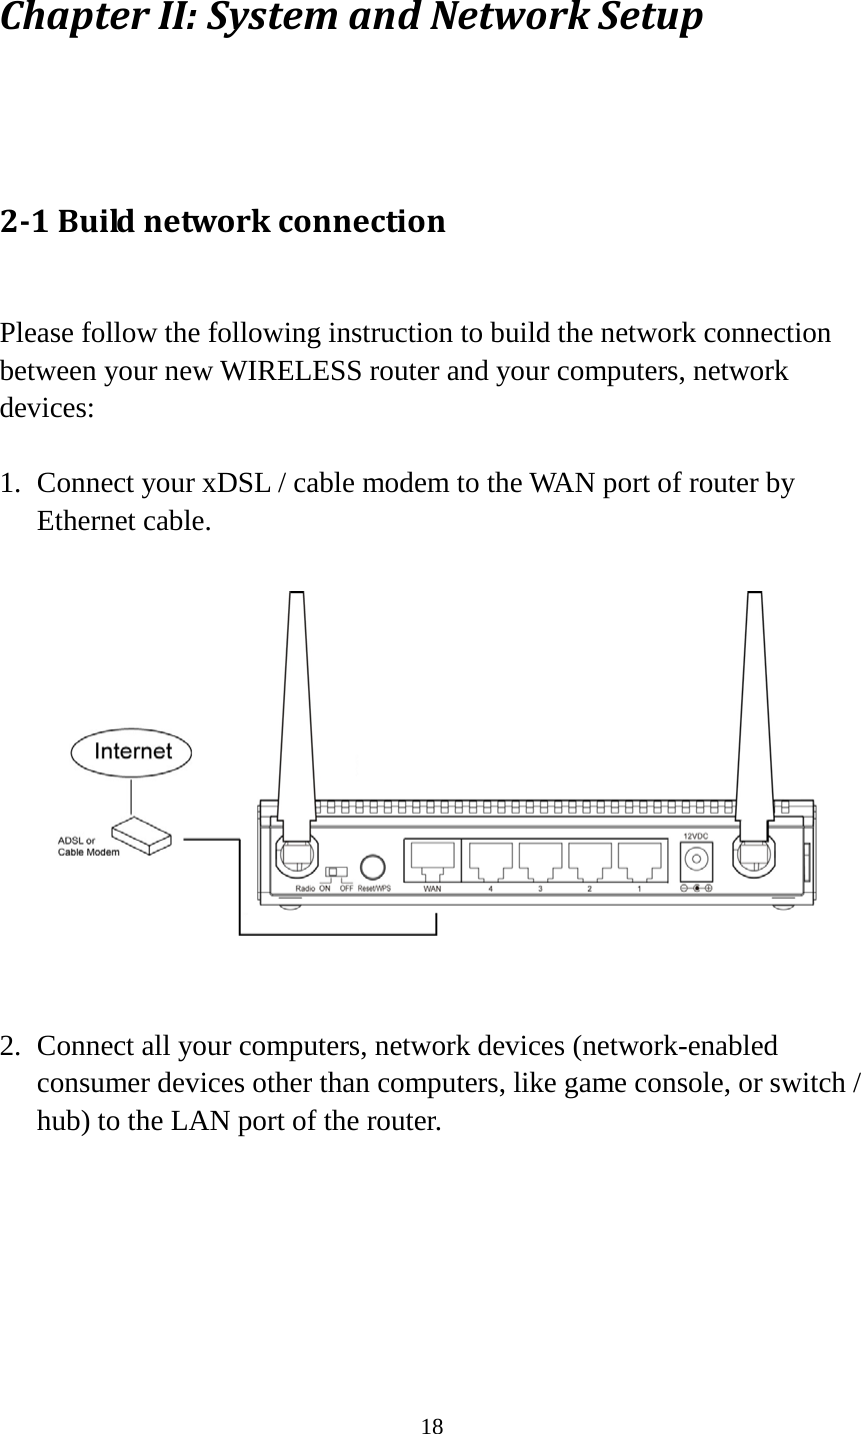 18 Chapter II: System and Network Setup  2-1 Build network connection  Please follow the following instruction to build the network connection between your new WIRELESS router and your computers, network devices:  1. Connect your xDSL / cable modem to the WAN port of router by Ethernet cable.    2. Connect all your computers, network devices (network-enabled consumer devices other than computers, like game console, or switch / hub) to the LAN port of the router.  